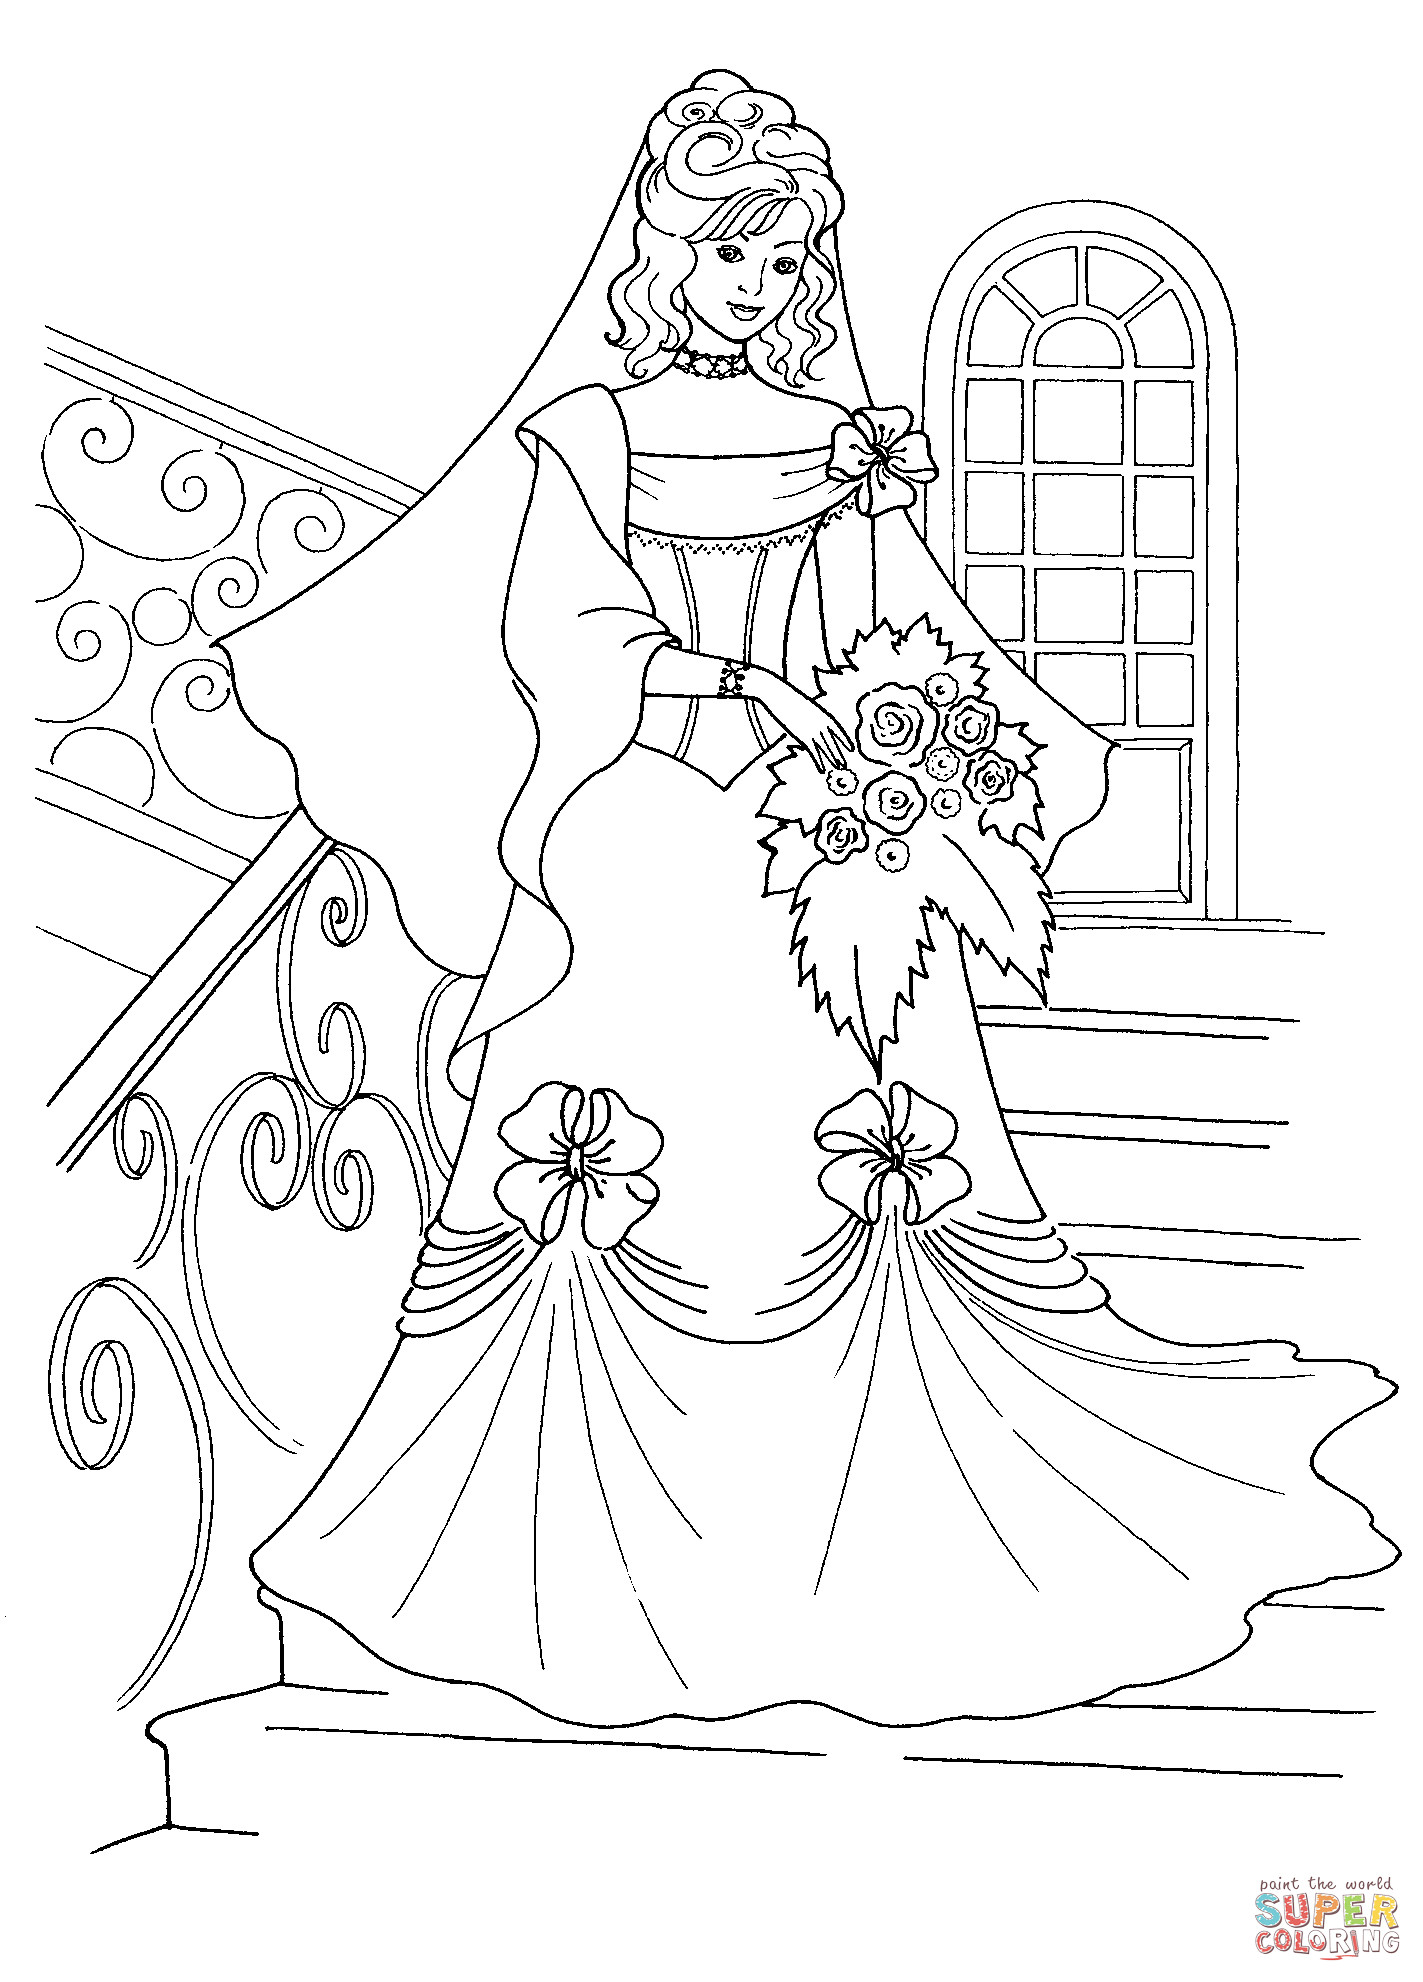 Wedding Dress Coloring Pages
 Princess in a Wedding Dress coloring page